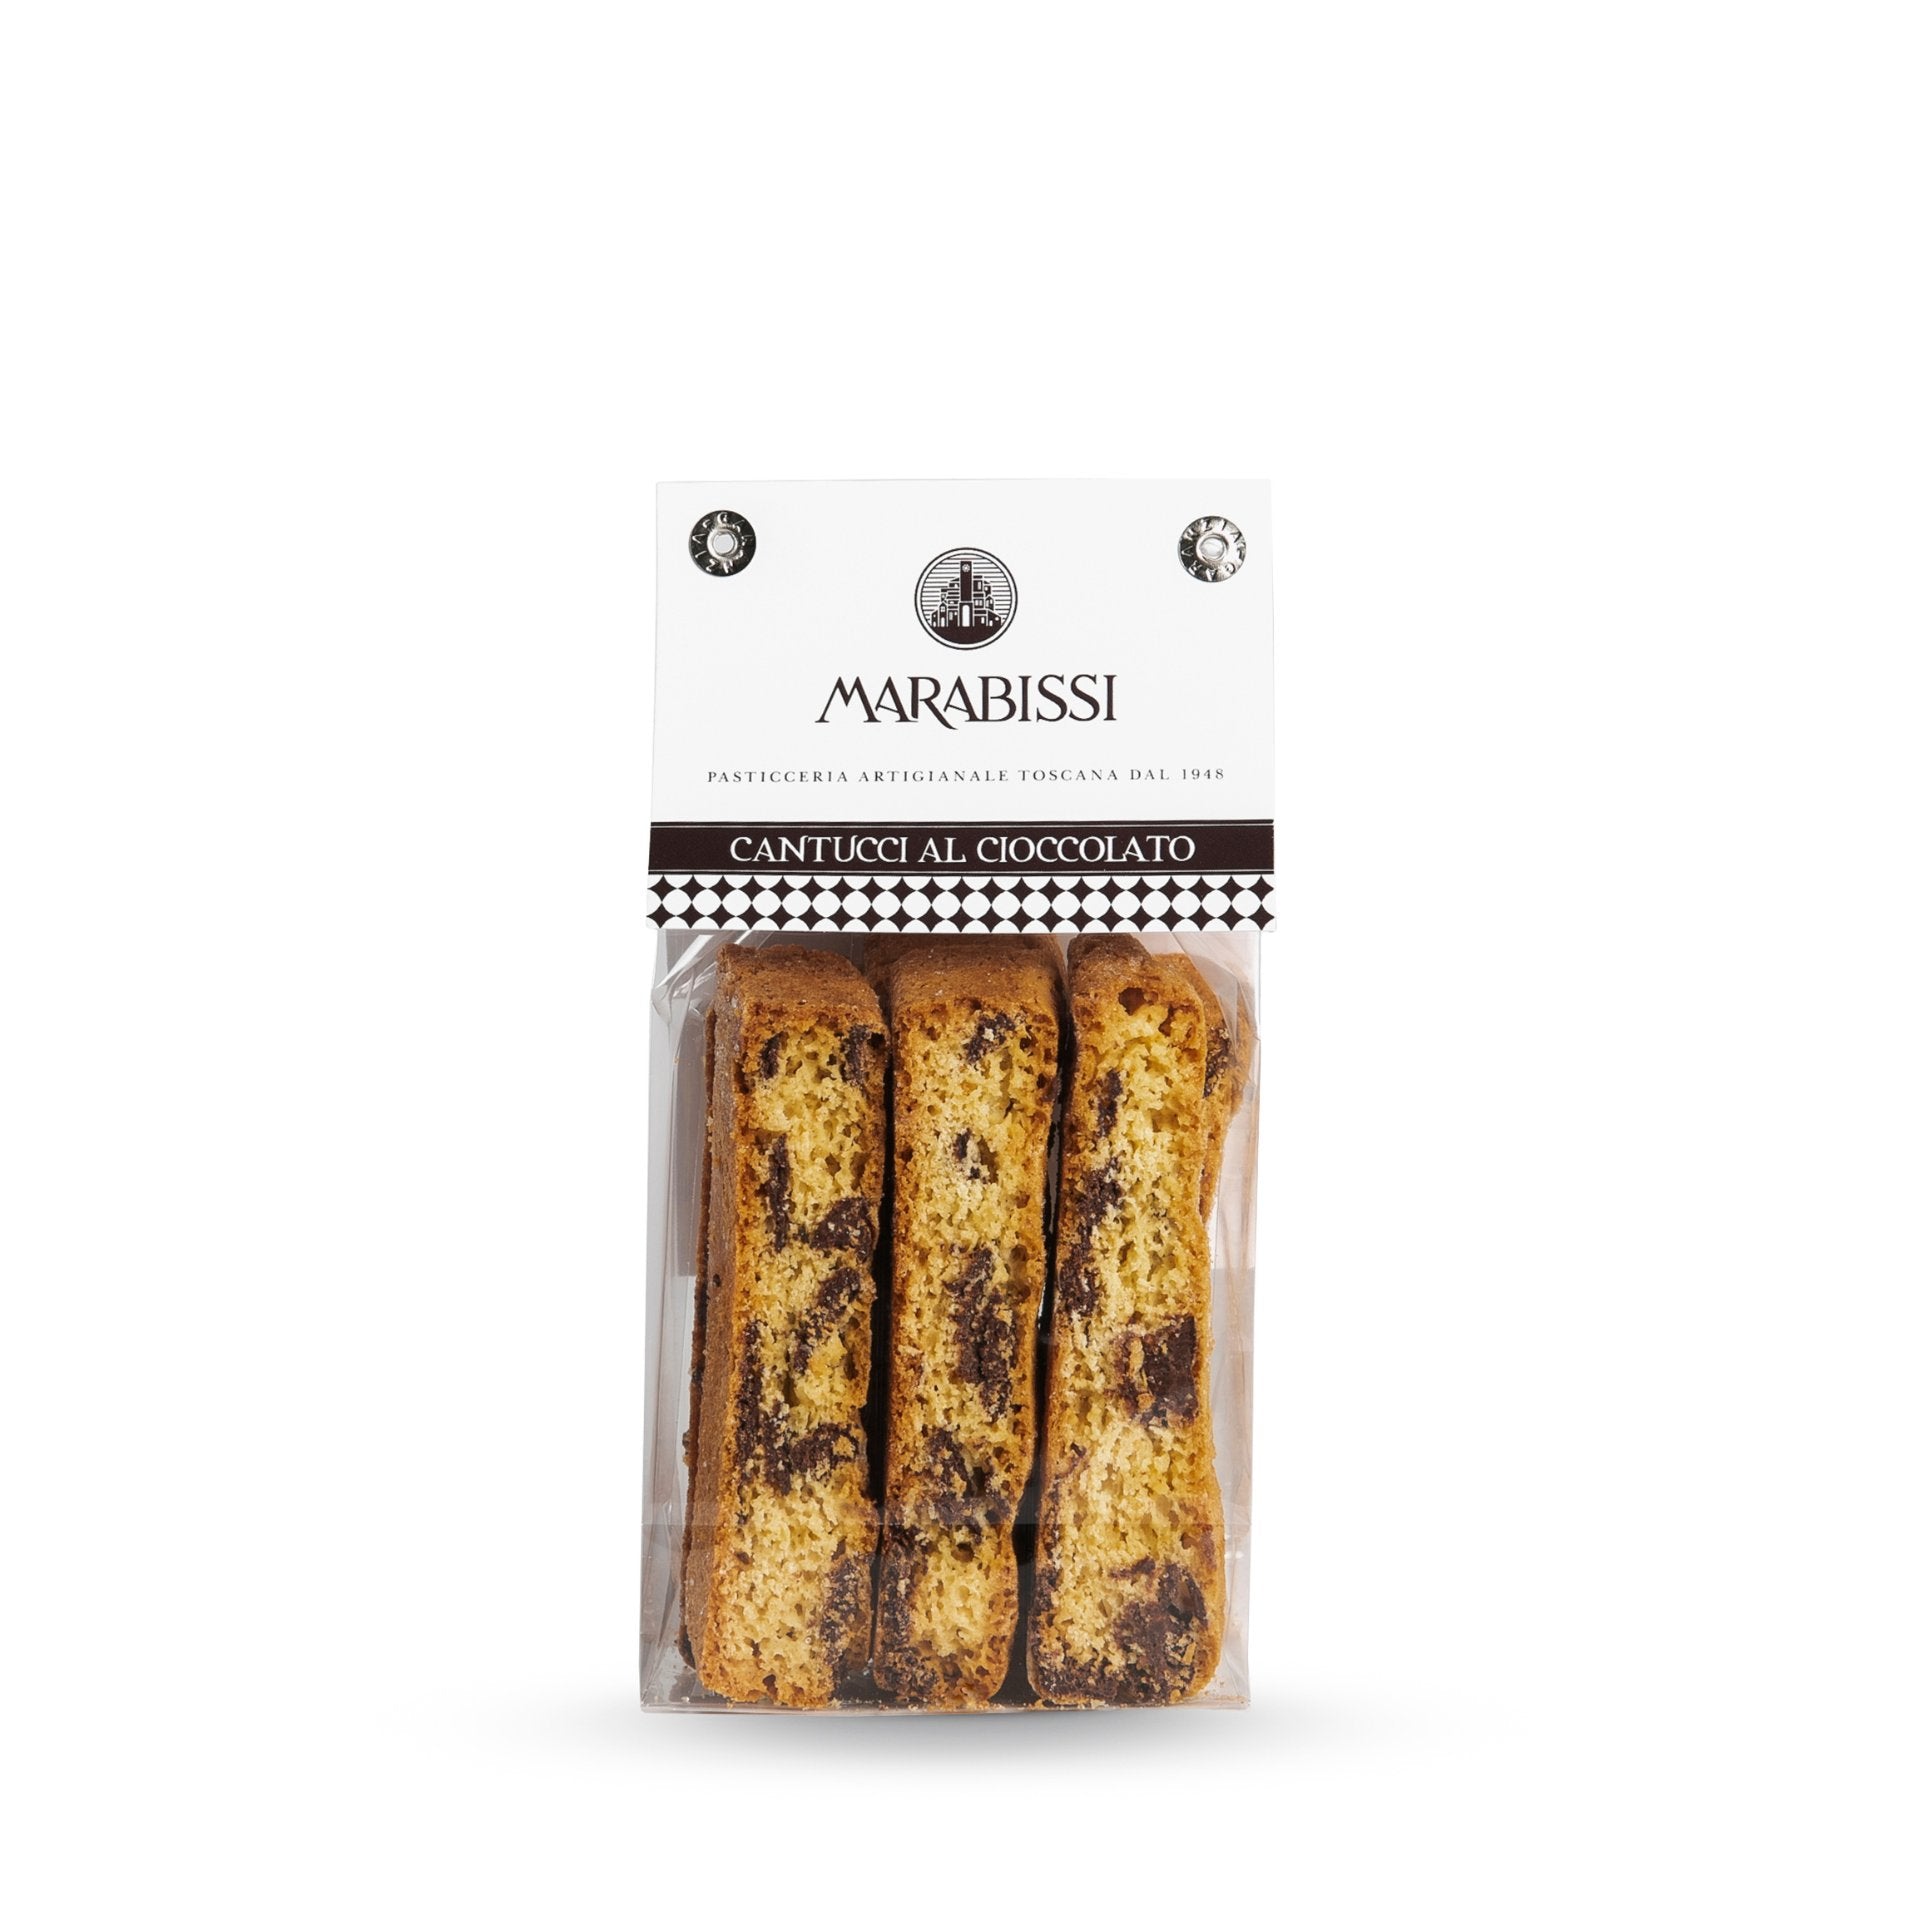 Marabissi Chocolate Chip Cantucci (Bag) 120g  | Imported and distributed in the UK by Just Gourmet Foods